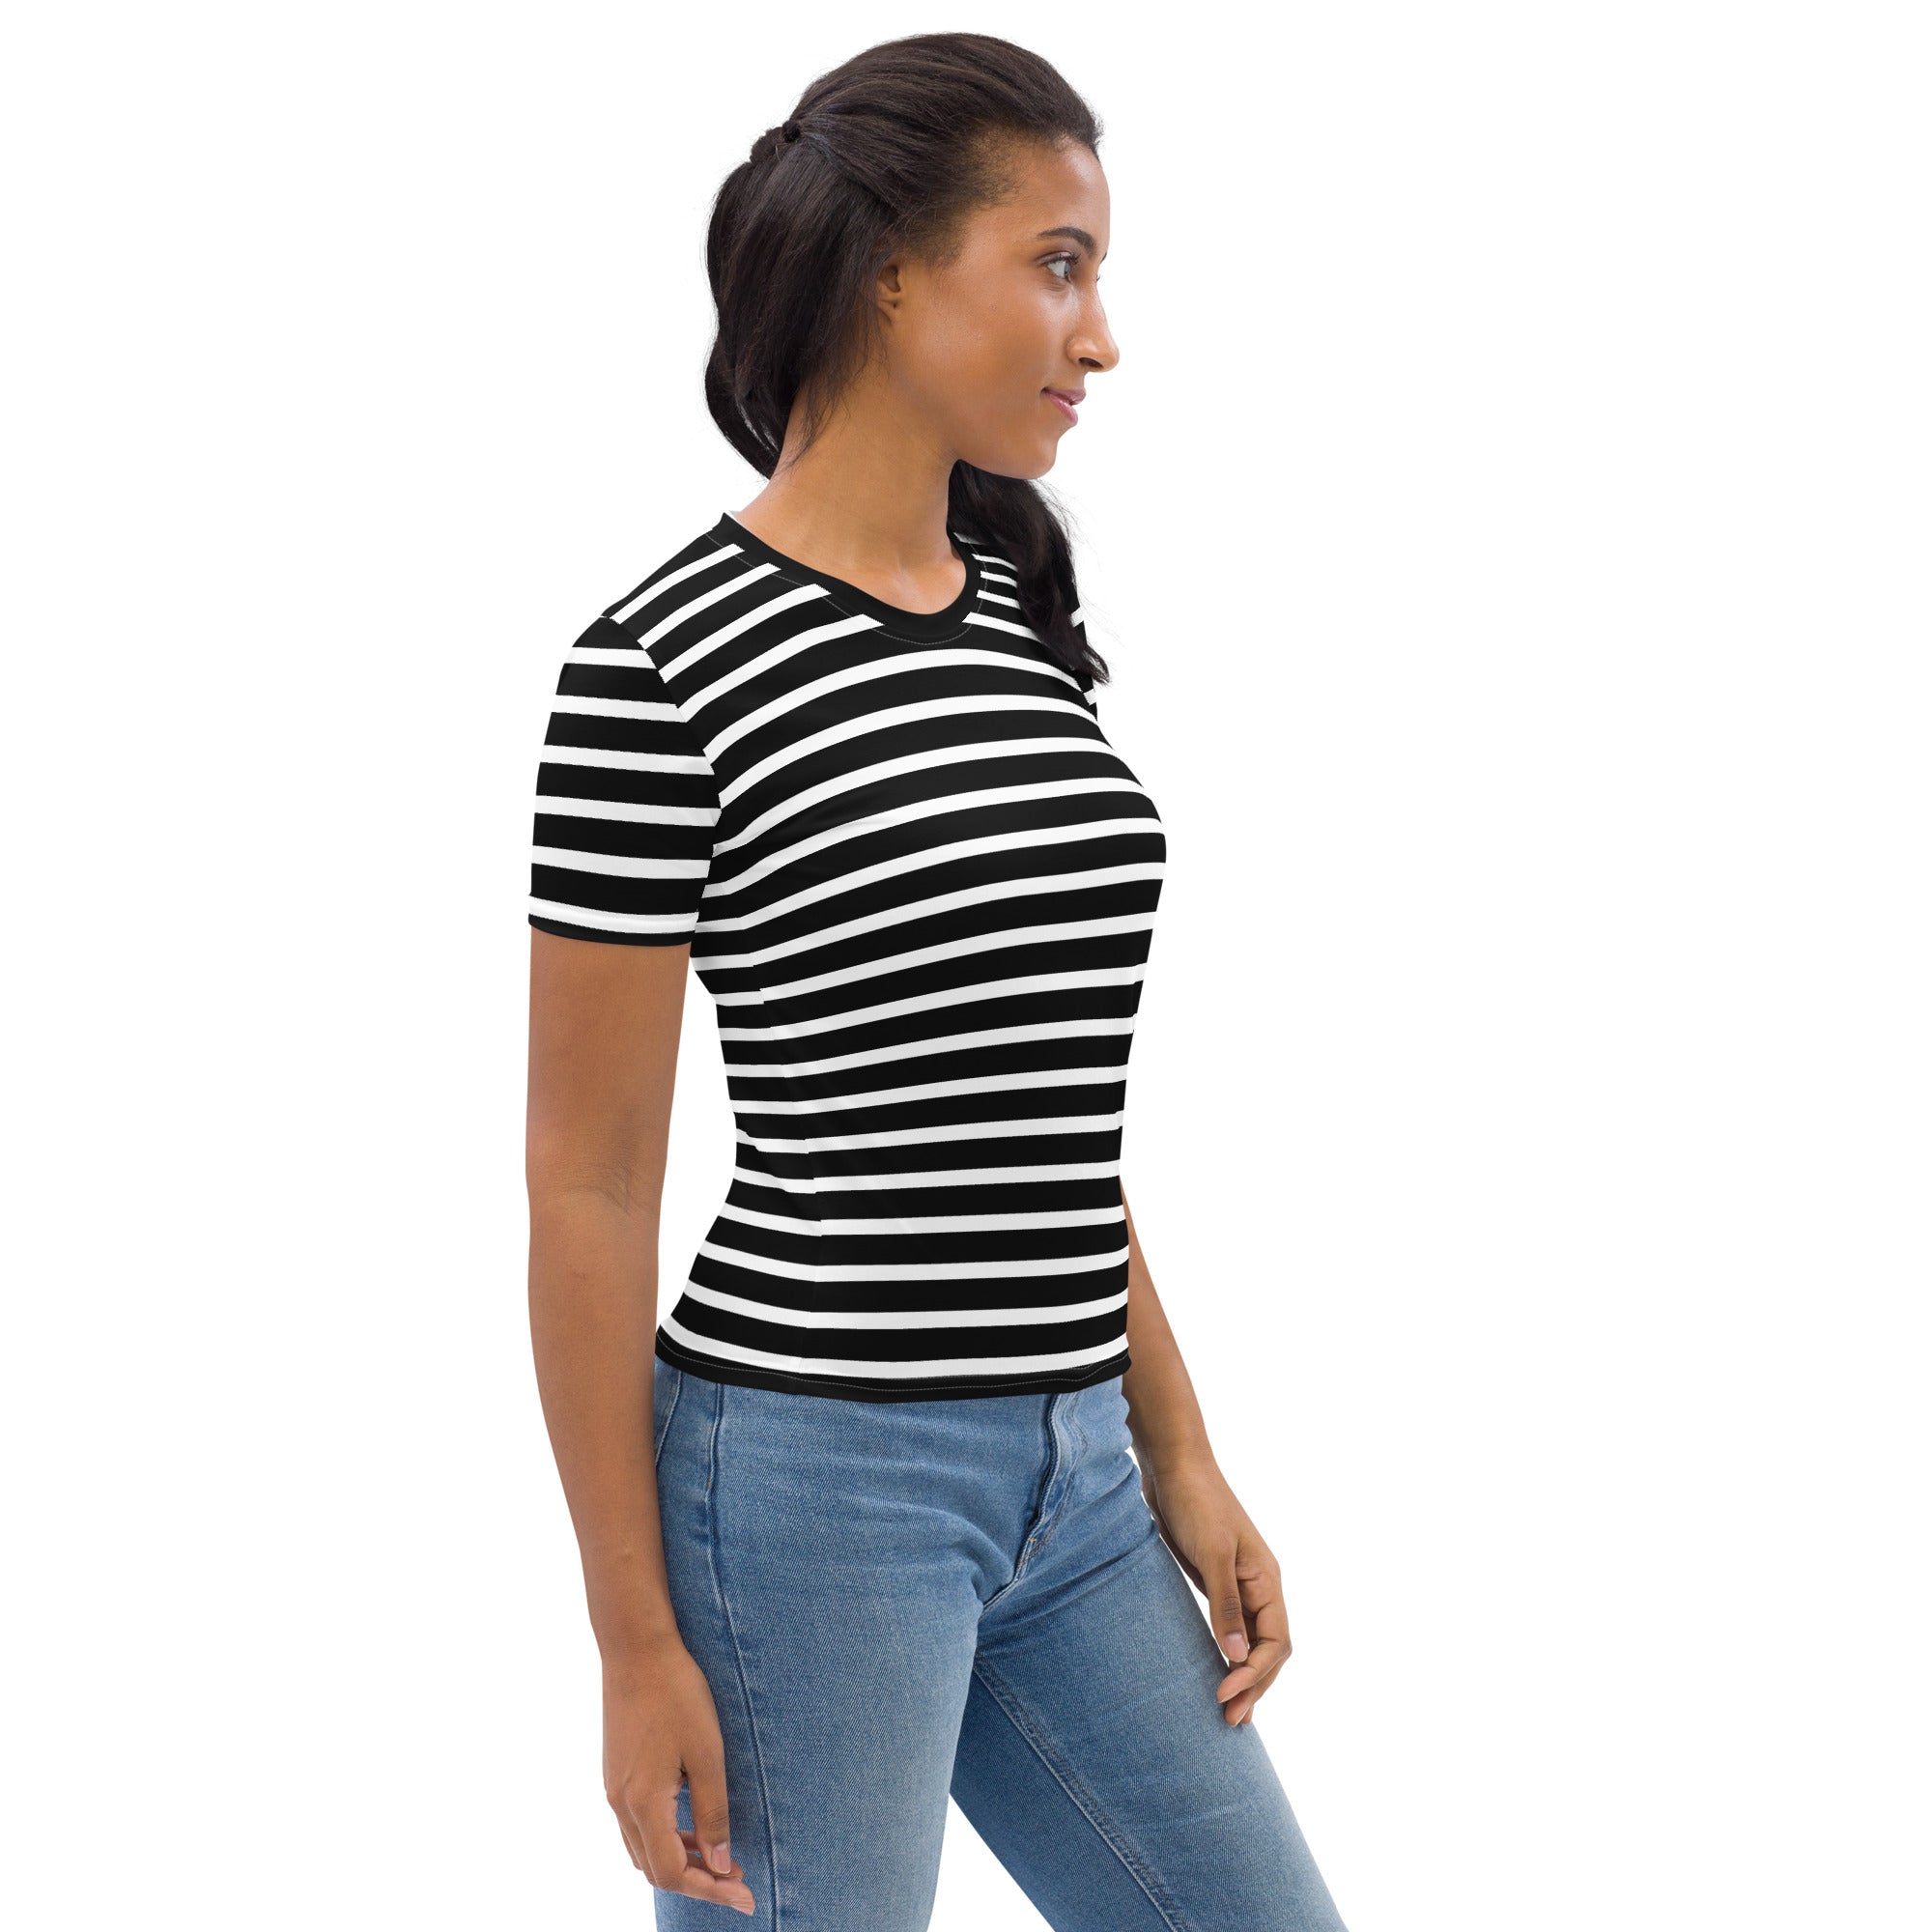 Women's T-shirt- White and Black Striped